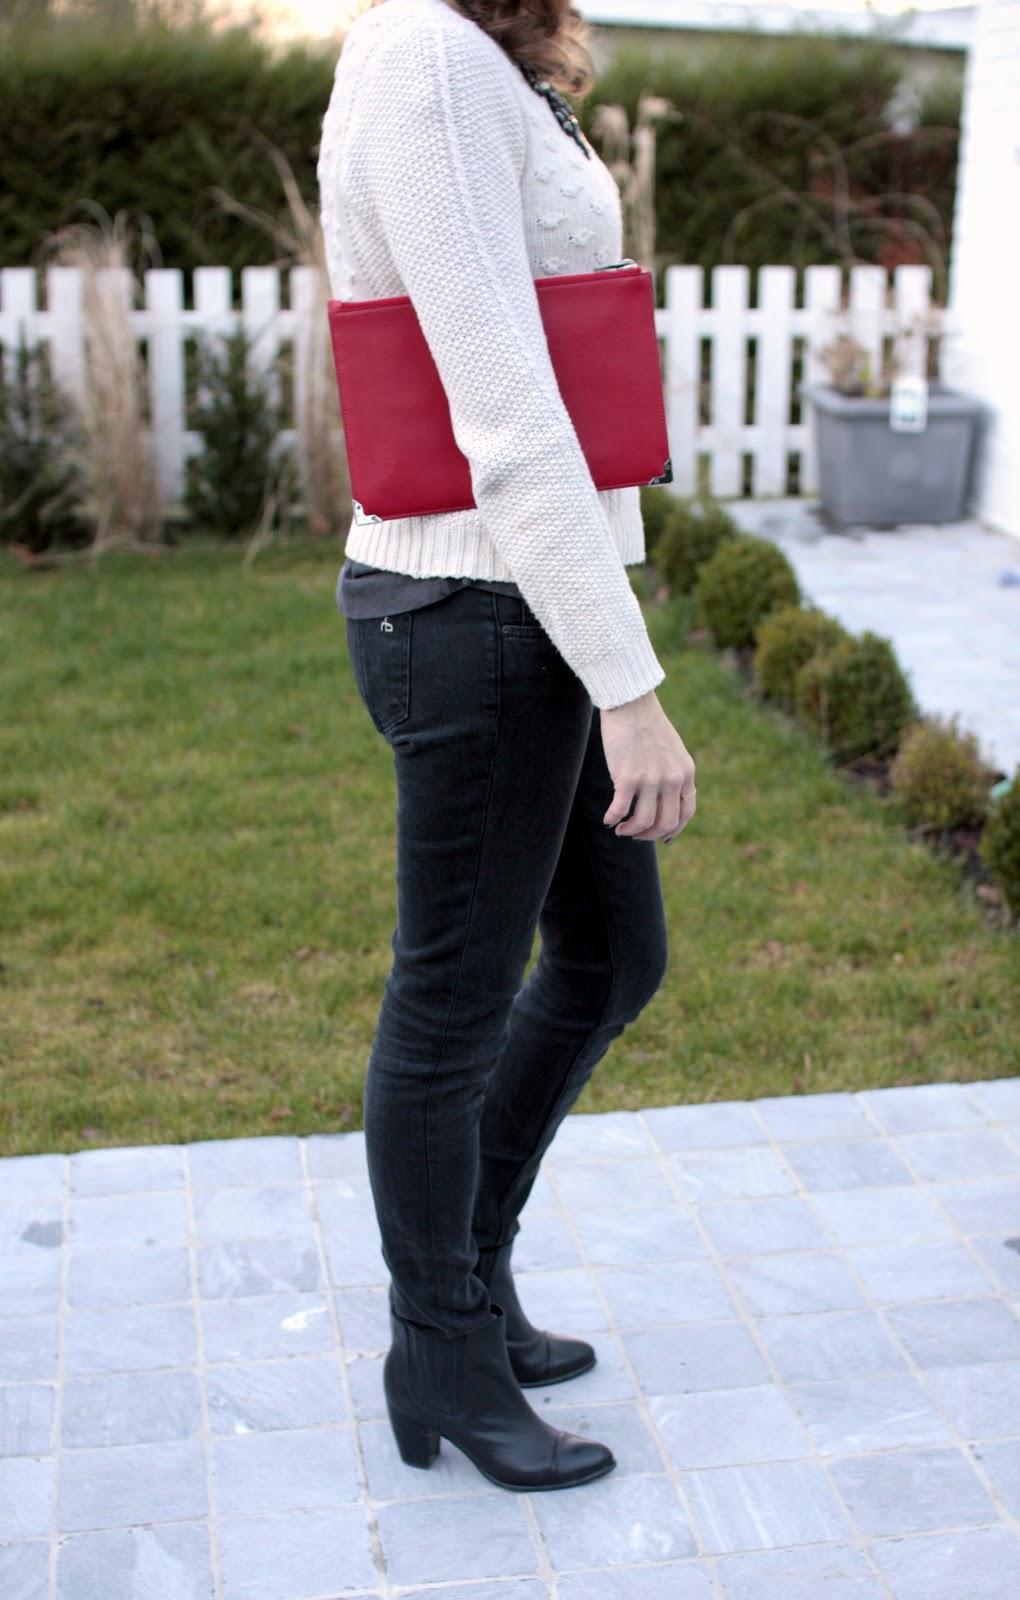 The dark grey jeans and the bright red clutch